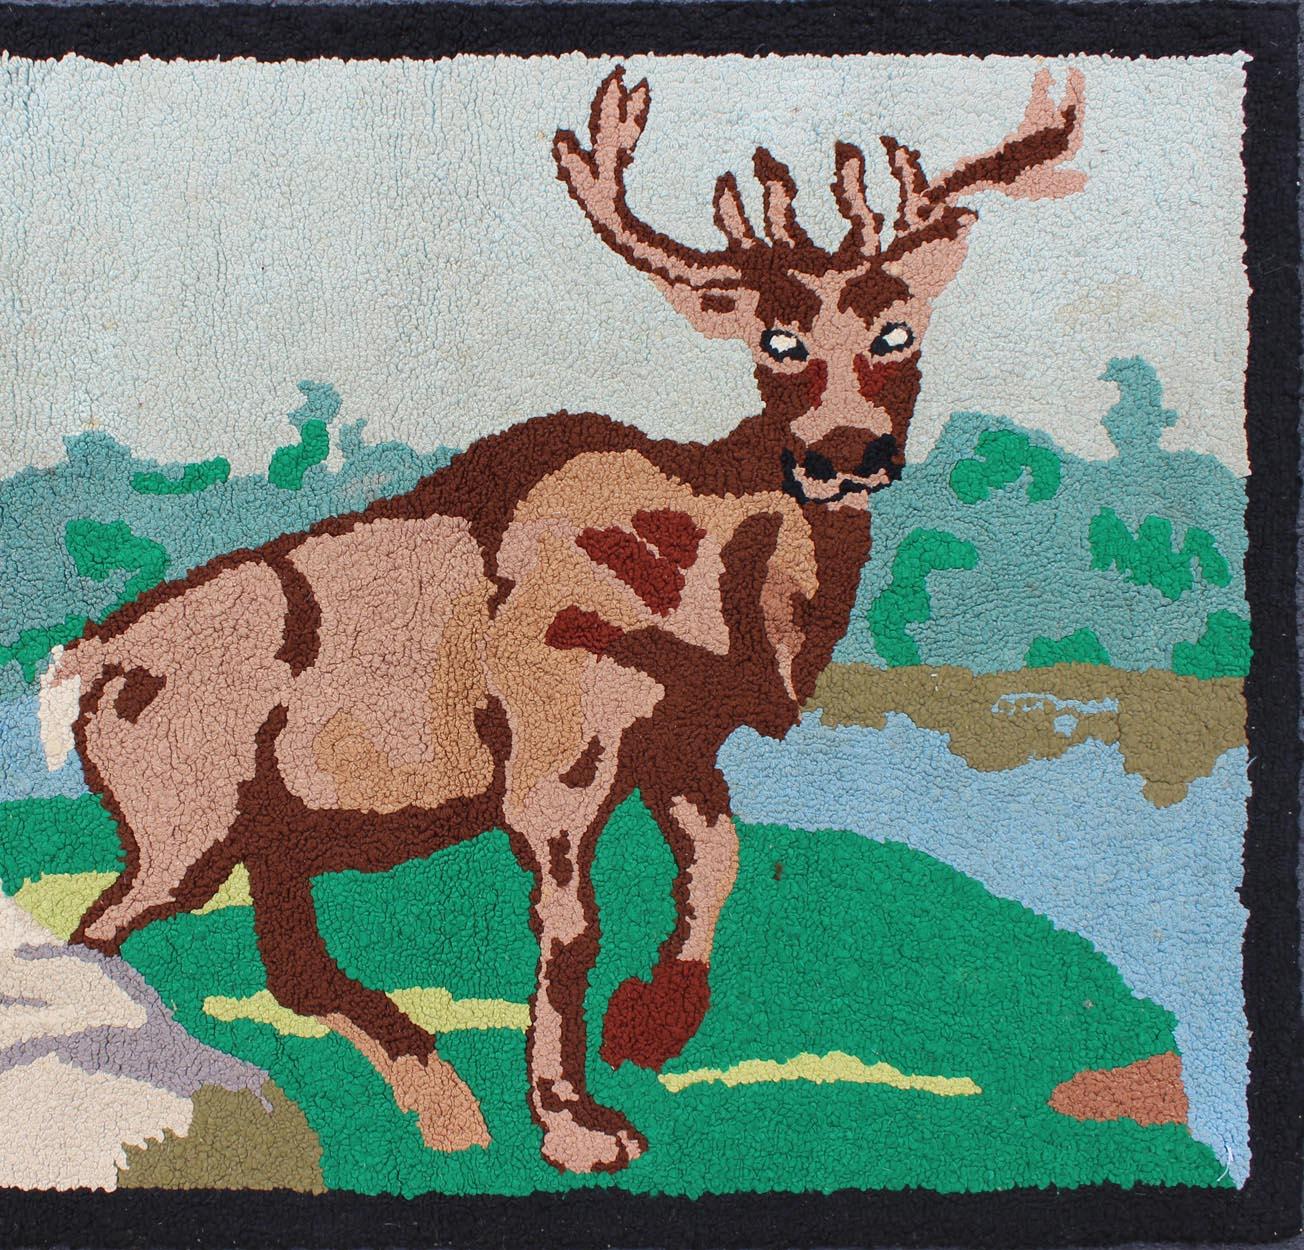 American Hooked rug featuring a Elk in the high mountains, rug 13-0403, country of origin / type: United States / Hooked, circa 1940

The Hooked Rug depicts the Elk, Aspen Trees, and a lake/river in the background. 

Measures: 2'9 x 3'11.